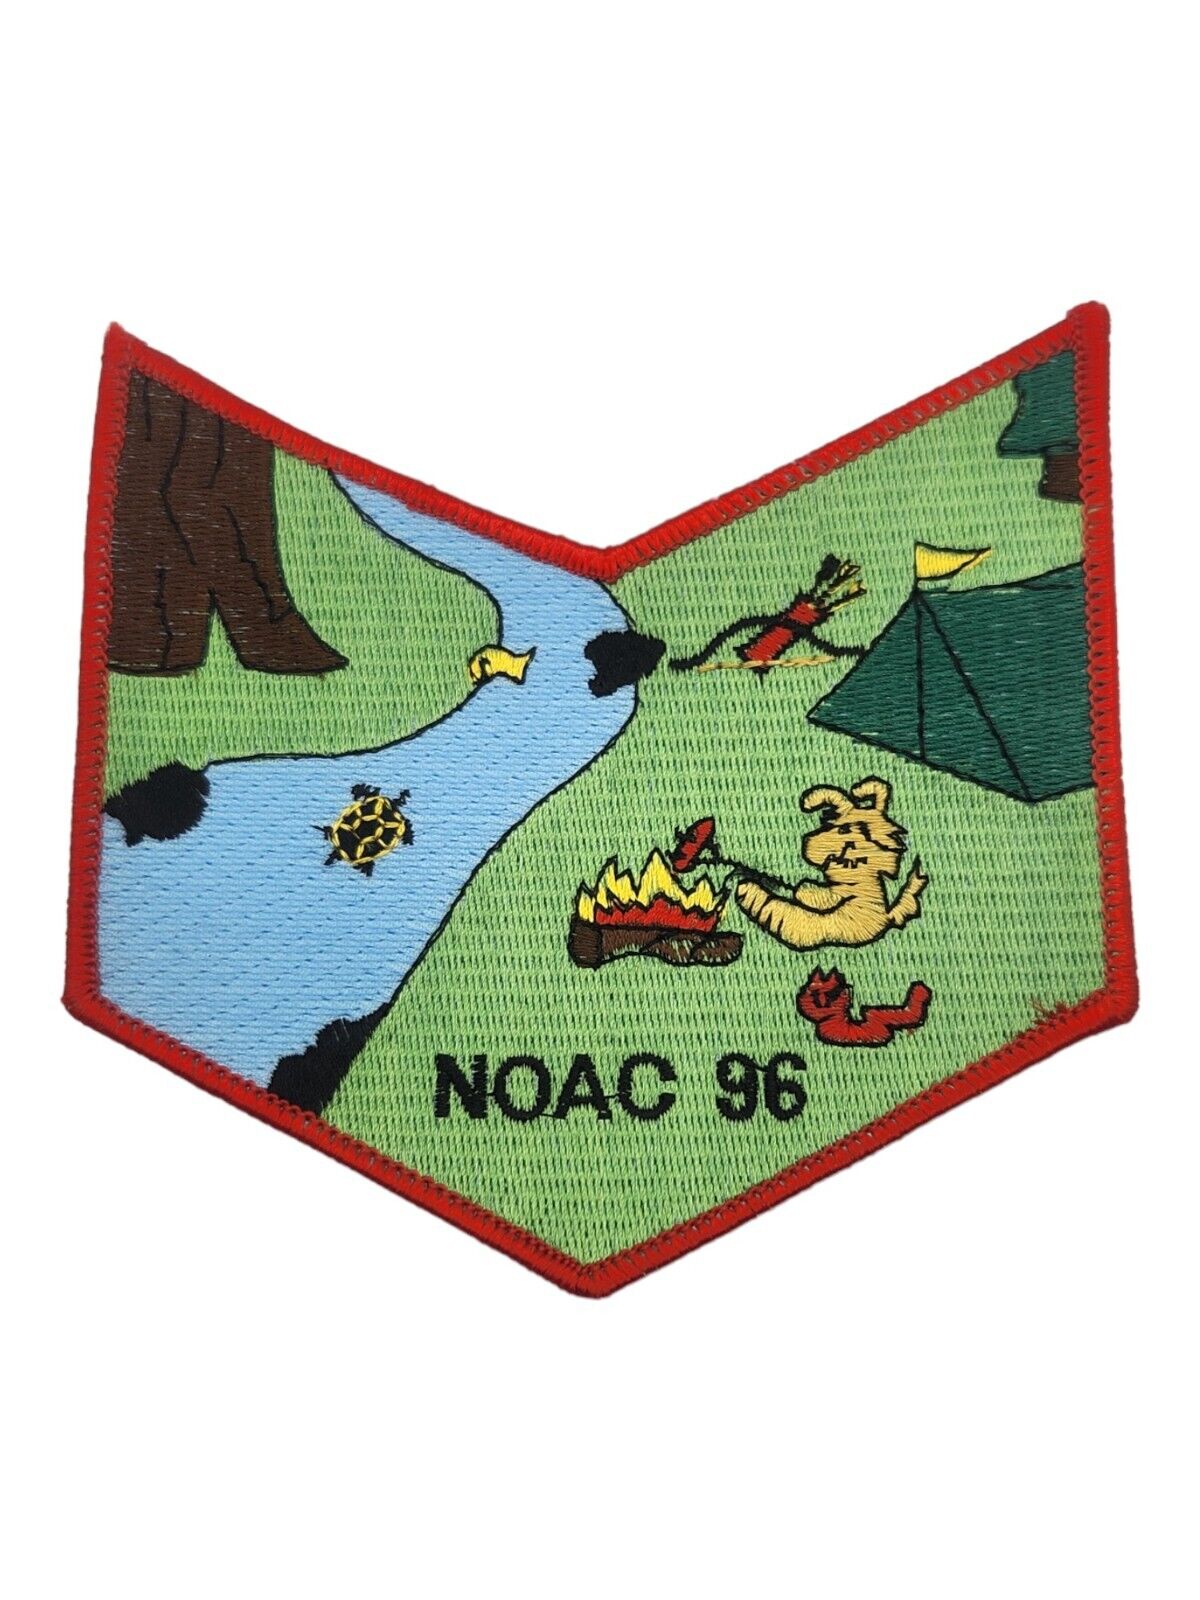 1996 National Order of the Arrow Conference A Gaming Lodge NOAC Scouts BSA Patch